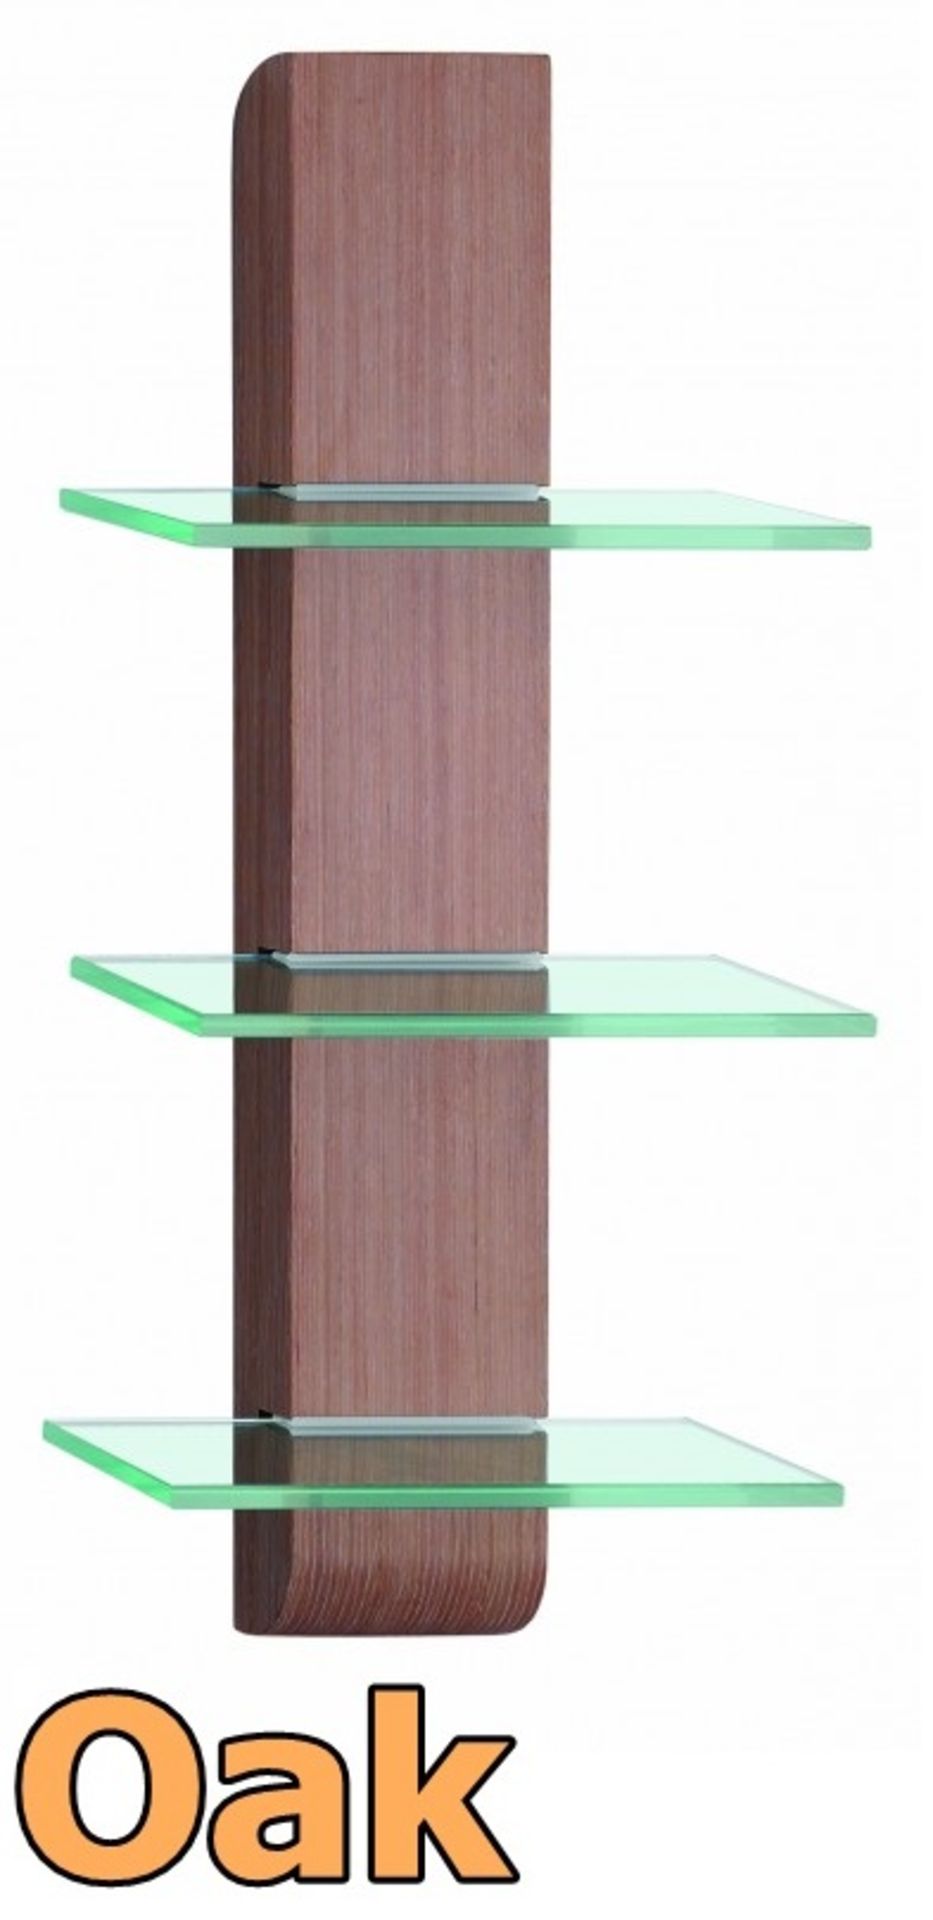 1 x Vogue ARC Series 1 Wall Mounted 3 Tier GLASS SHELF In LIGHT OAK - Manufactured to the Highest